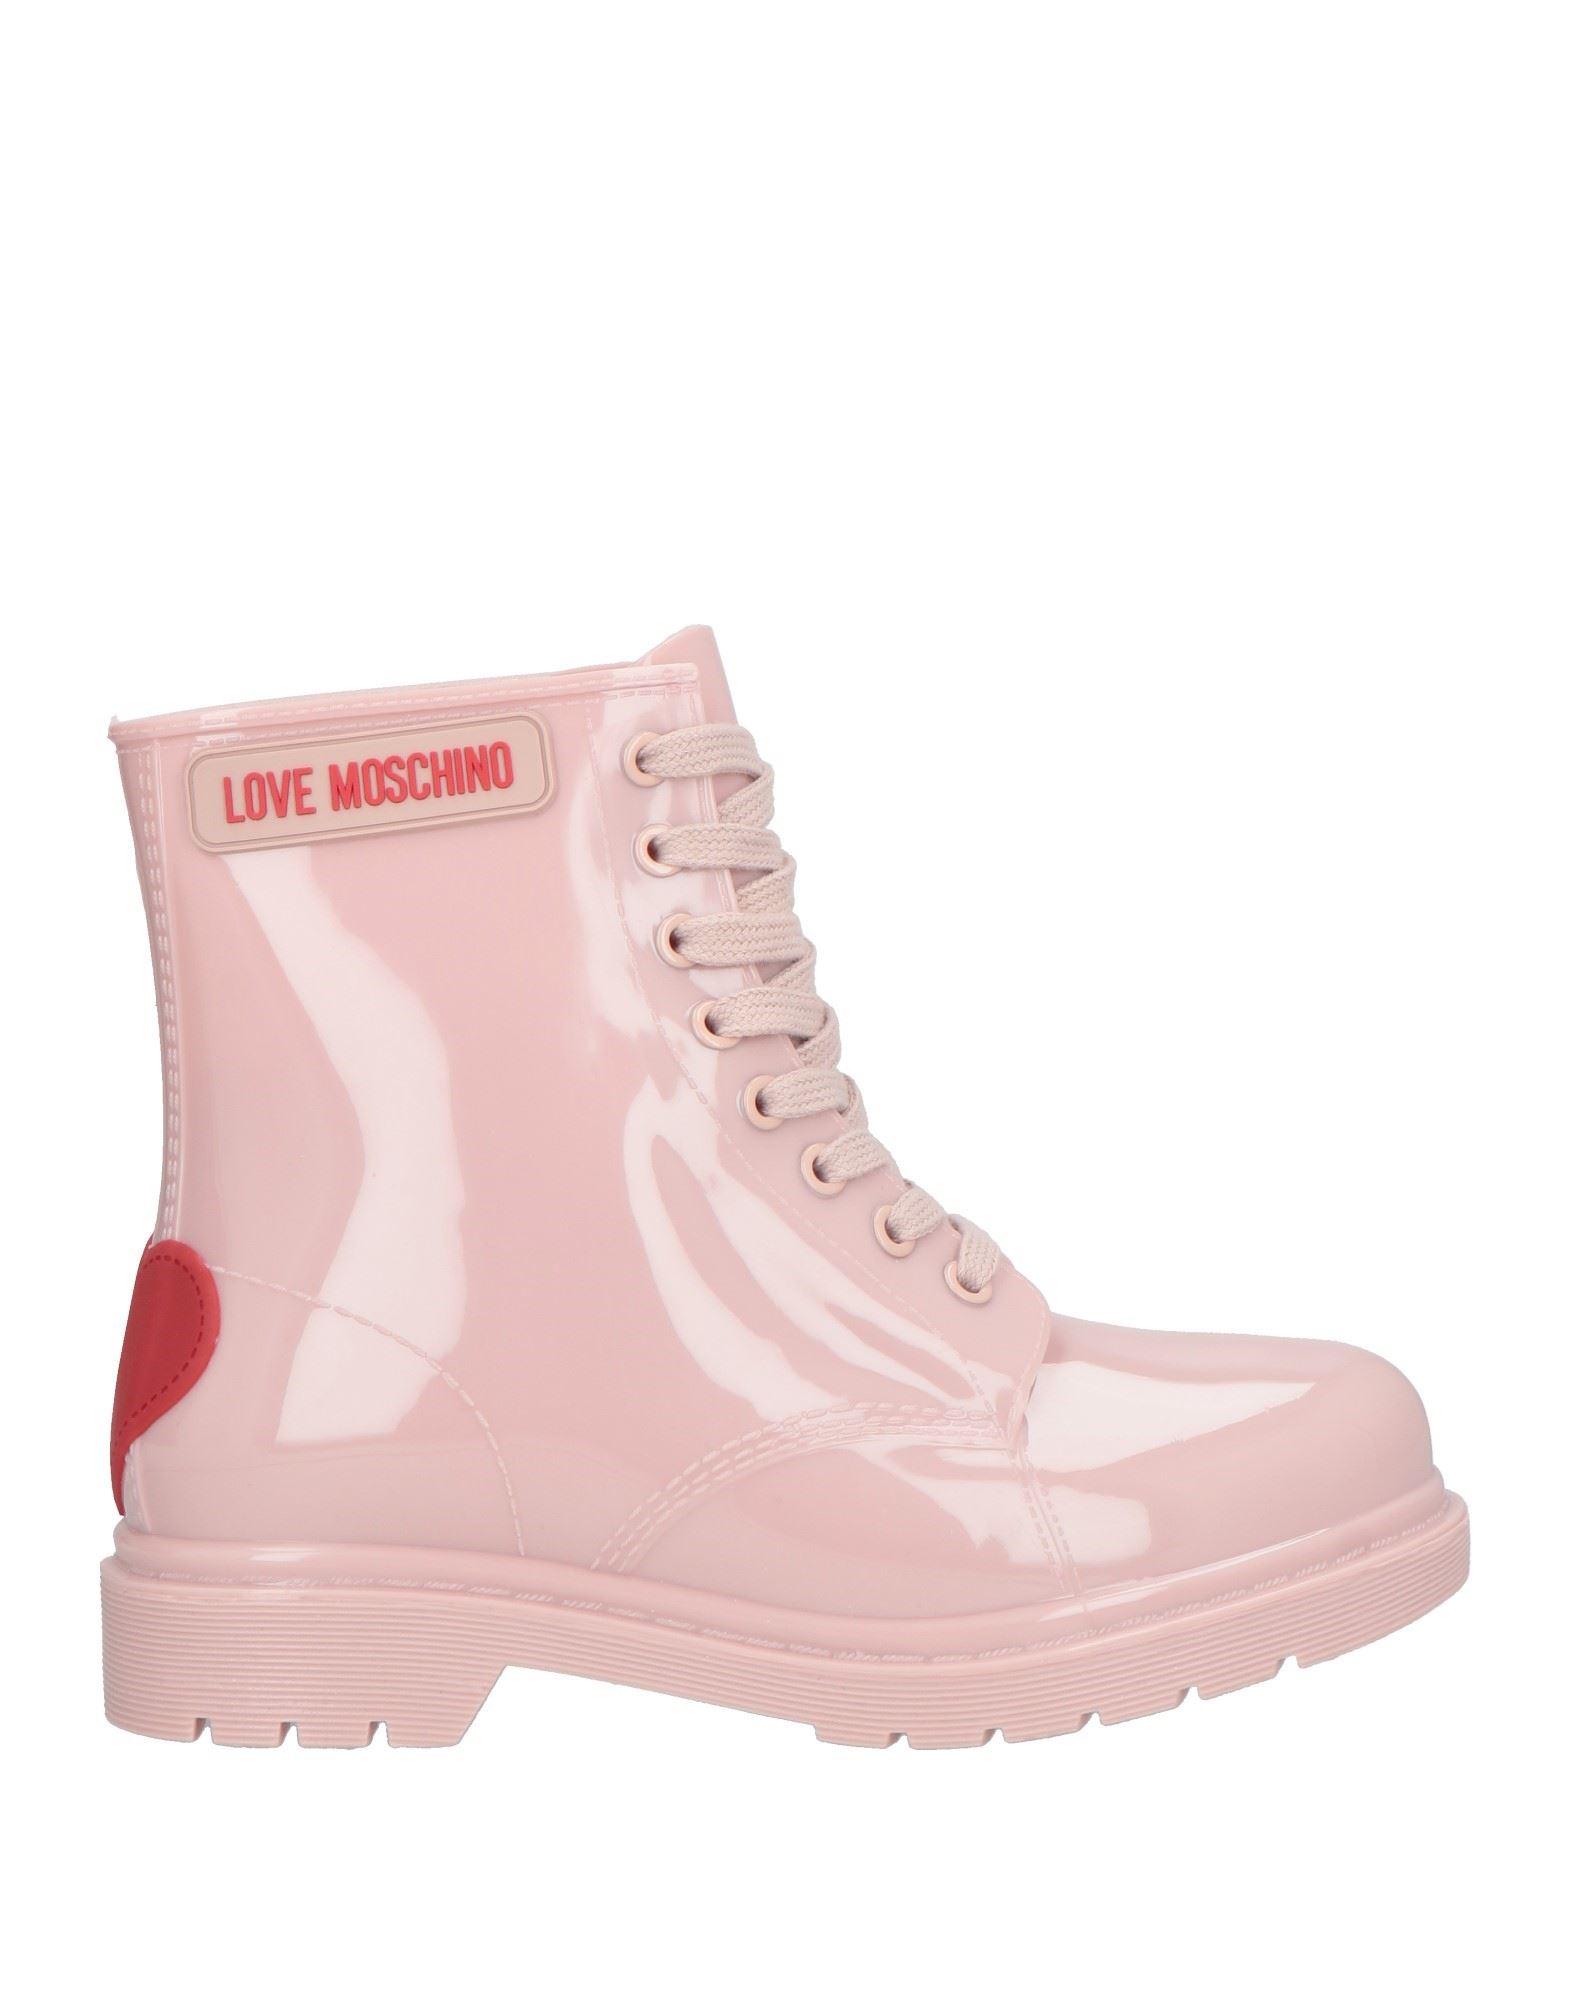 Love Moschino Ankle Boots in Pink | Lyst